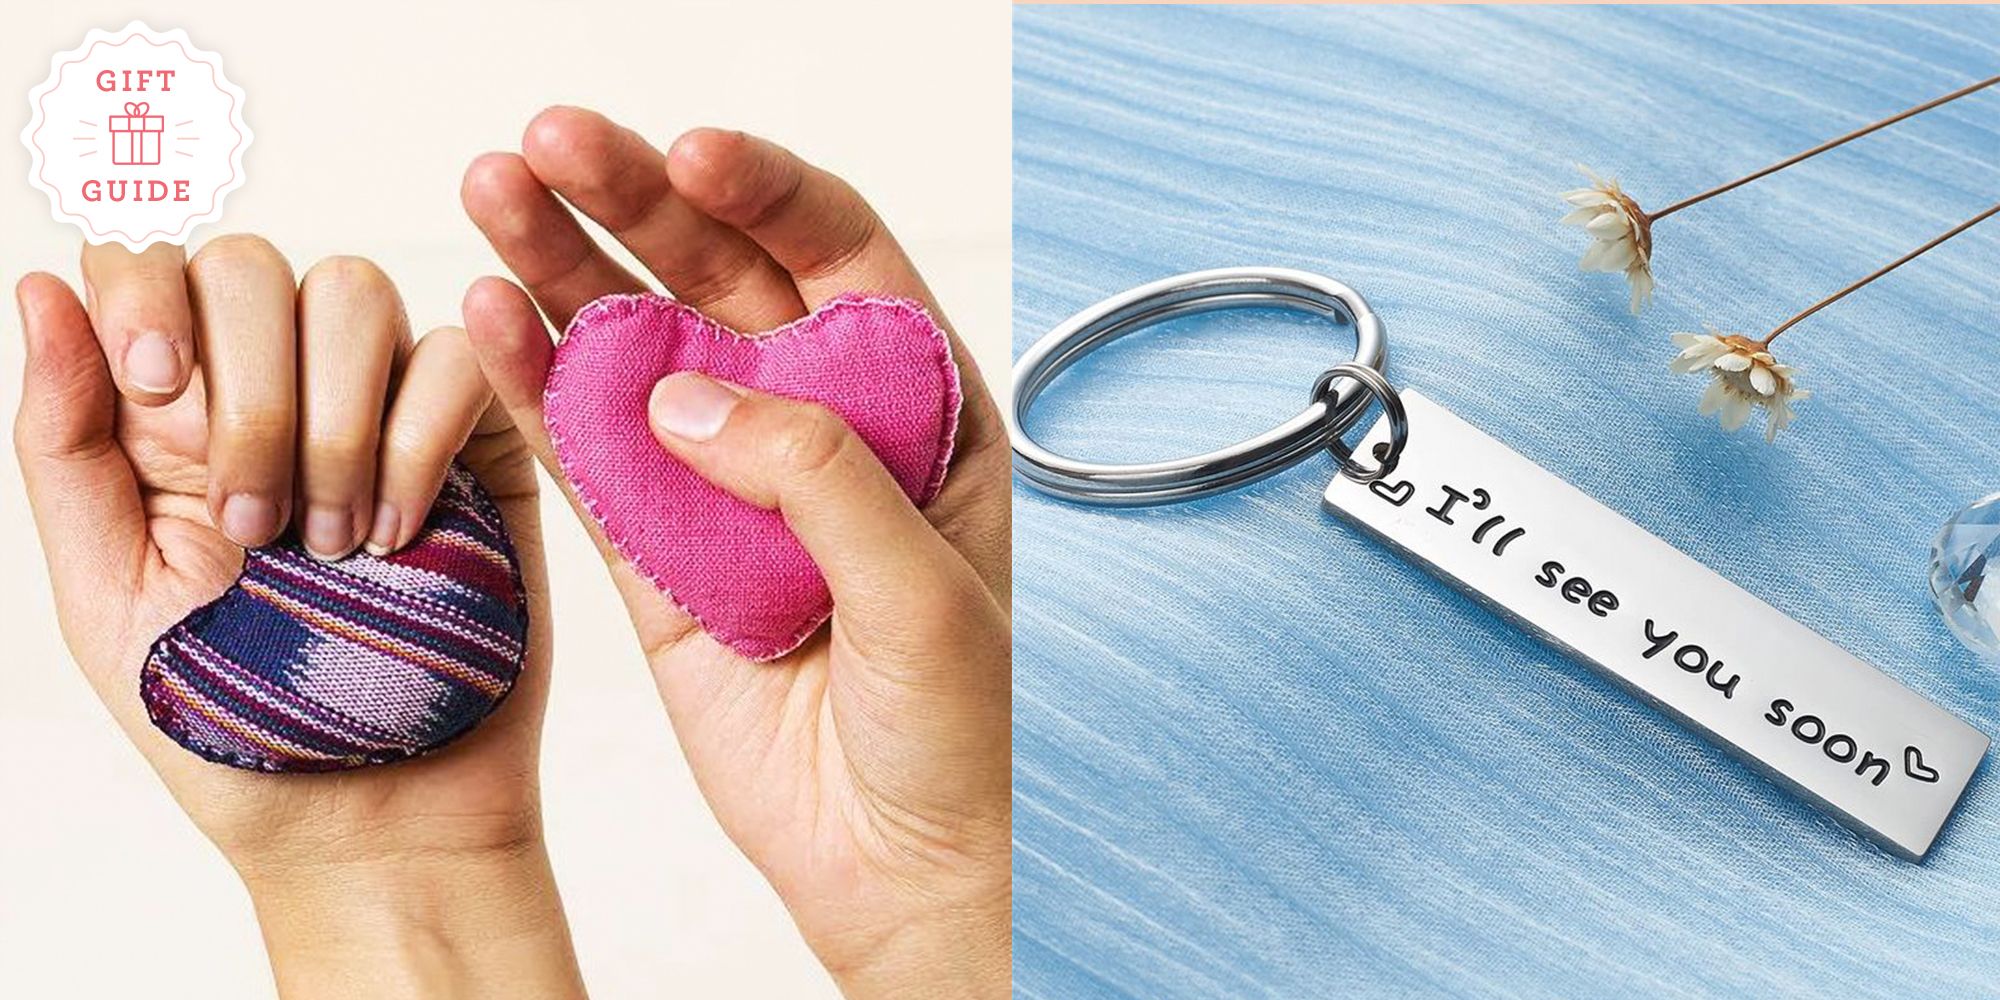 50+ Best Farewell Gift Ideas for Friends Moving Away » All Gifts Considered